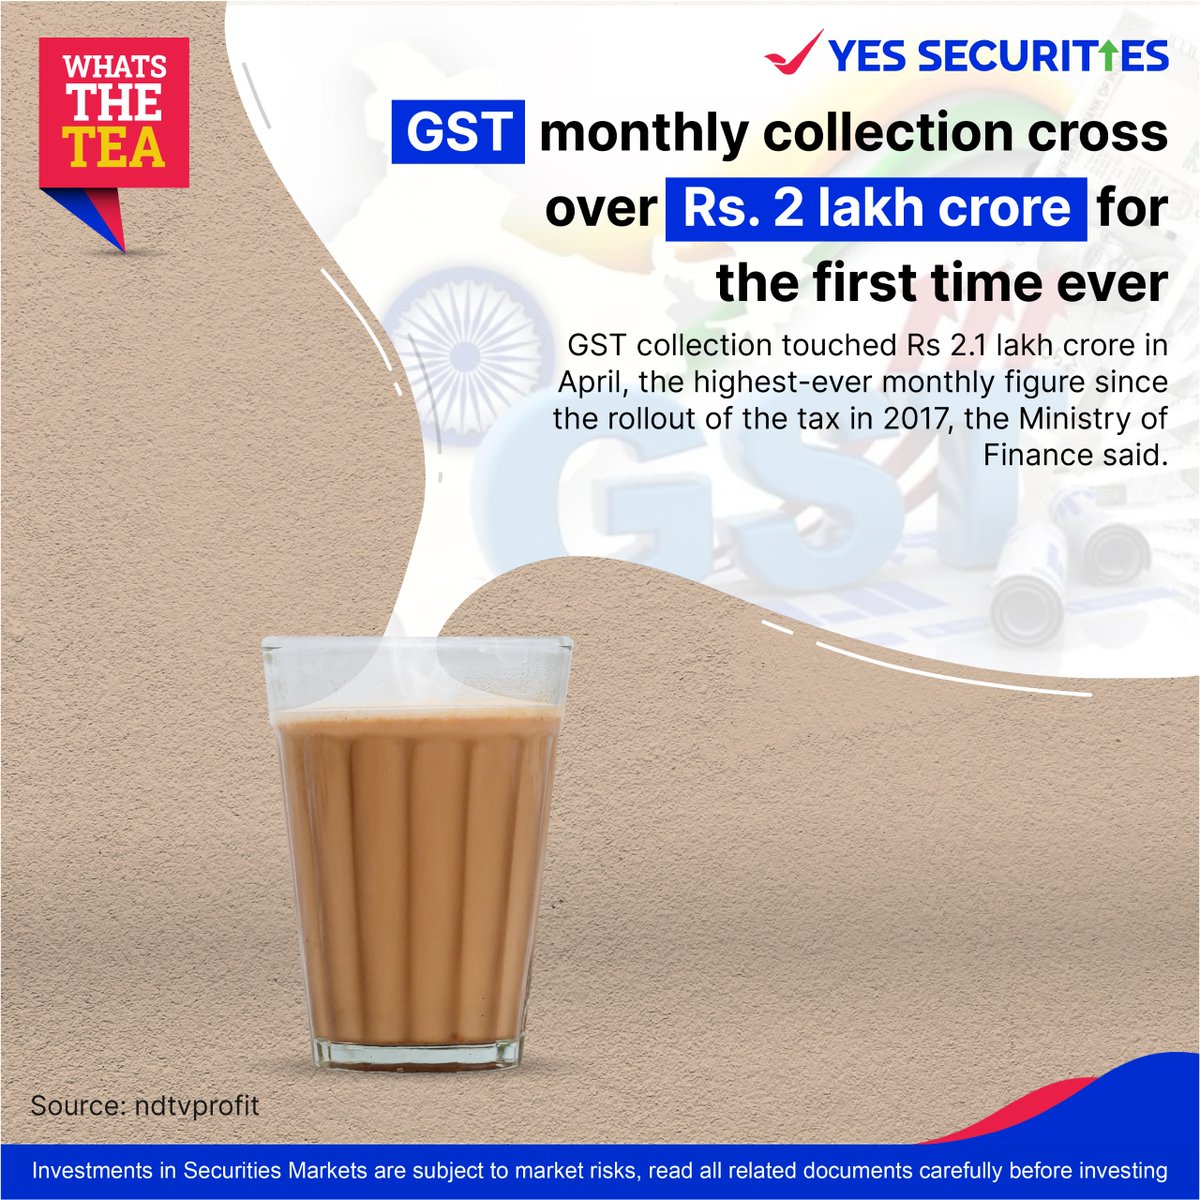 Here's the tea of the week, catch you with some more later.☕

Disclaimer: bit.ly/3yKOHTh

#YESSECURITIES #ChoiceoftheWize #WhatsTheTea #WeeklyNews #News #WeeklyWrap #NewsUpdate